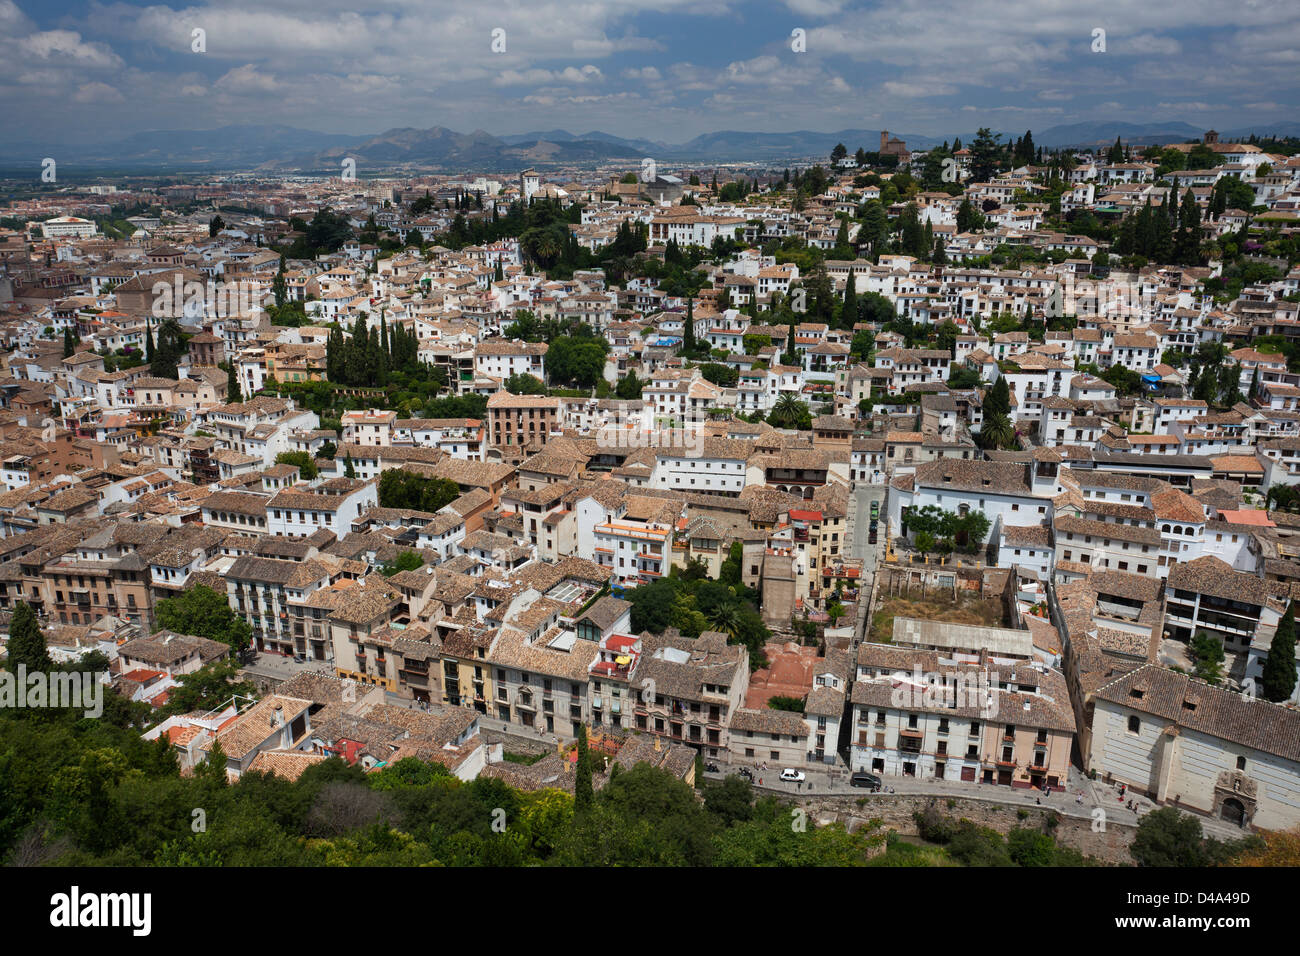 El Albayzín as it is seen from Alhambra palace Stock Photo